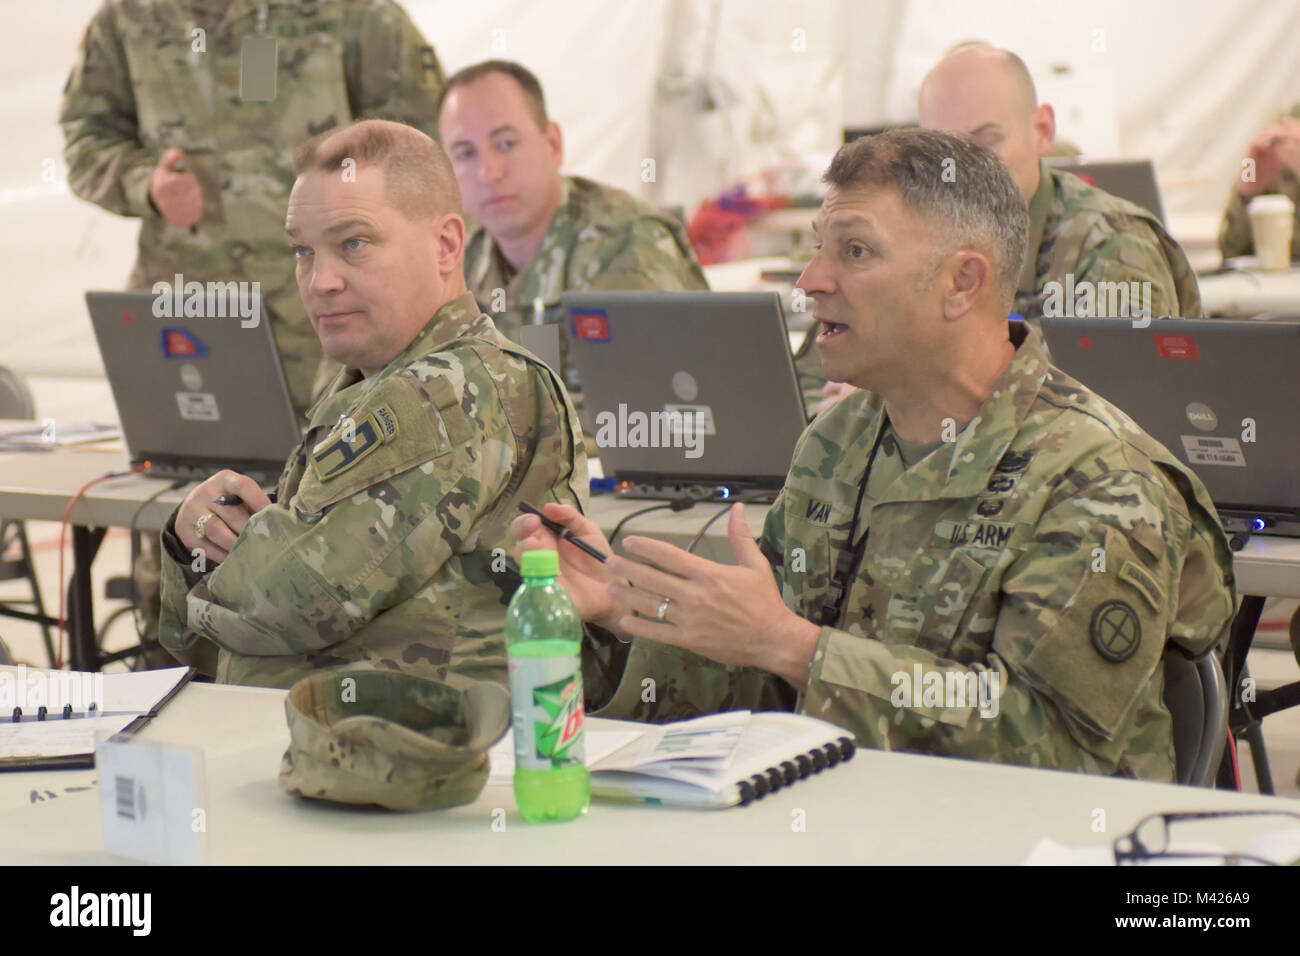 Brig. Gen. Jeffrey Van, deputy commanding general of the Kansas Army National Guard's 35th Infantry Division and senior mentor of the culminating training exercise for the Pennsylvania Army National Guard's 28th Infantry Division, leads a discussion during a briefing at Fort Hood, Texas, Jan. 31, 2018. The 28th ID is preparing to deploy to the Middle East, where they will take over the 35th ID's current mission of supporting combat operations and theater security cooperation with the United States' 17 partner nations in the region. (Photo altered for security purposes.) Stock Photo